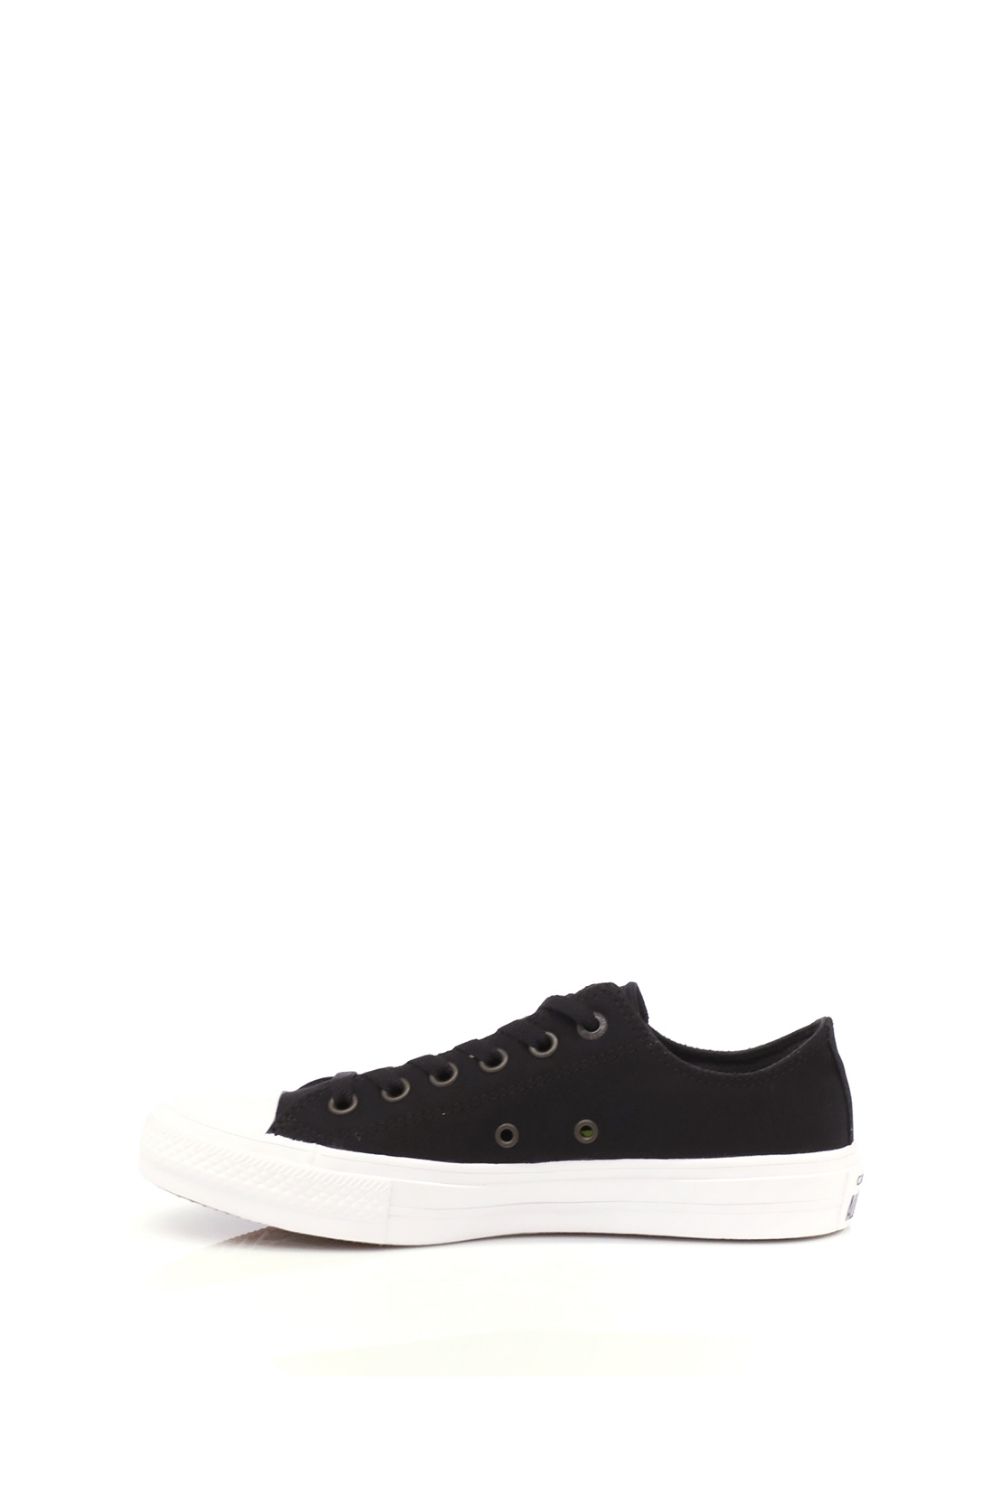 CONVERSE – Unisex sneakers Chuck Taylor All Star II Ox μαύρα